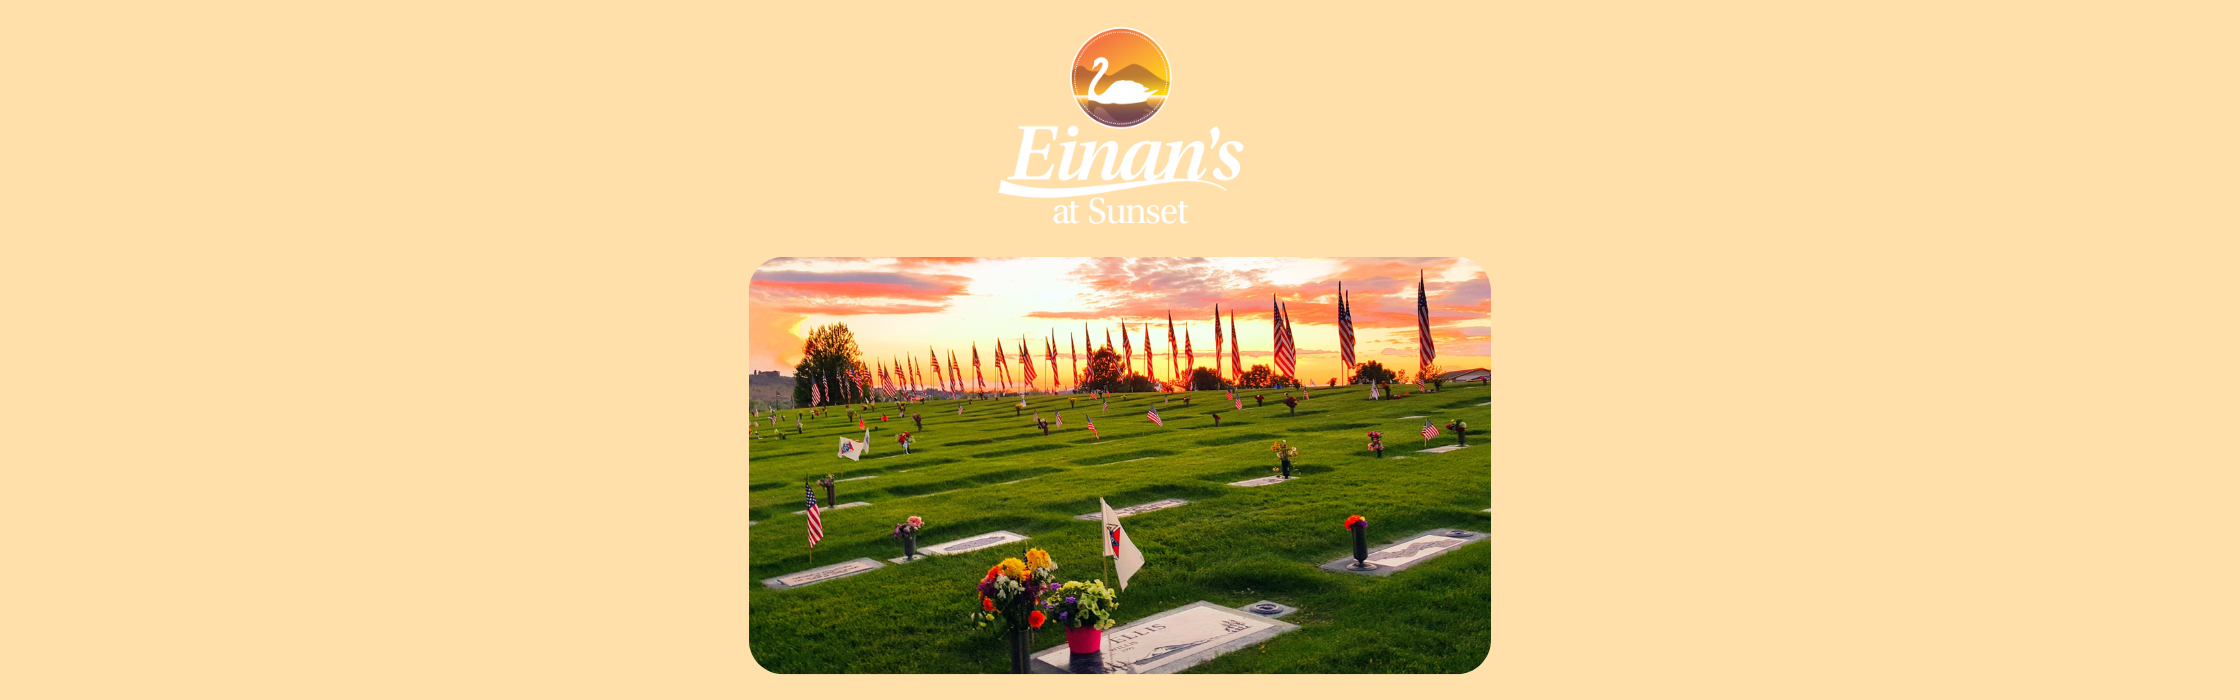 Einans at Sunset Funeral Home Memorial Funeral grave site with American flags and flowers 